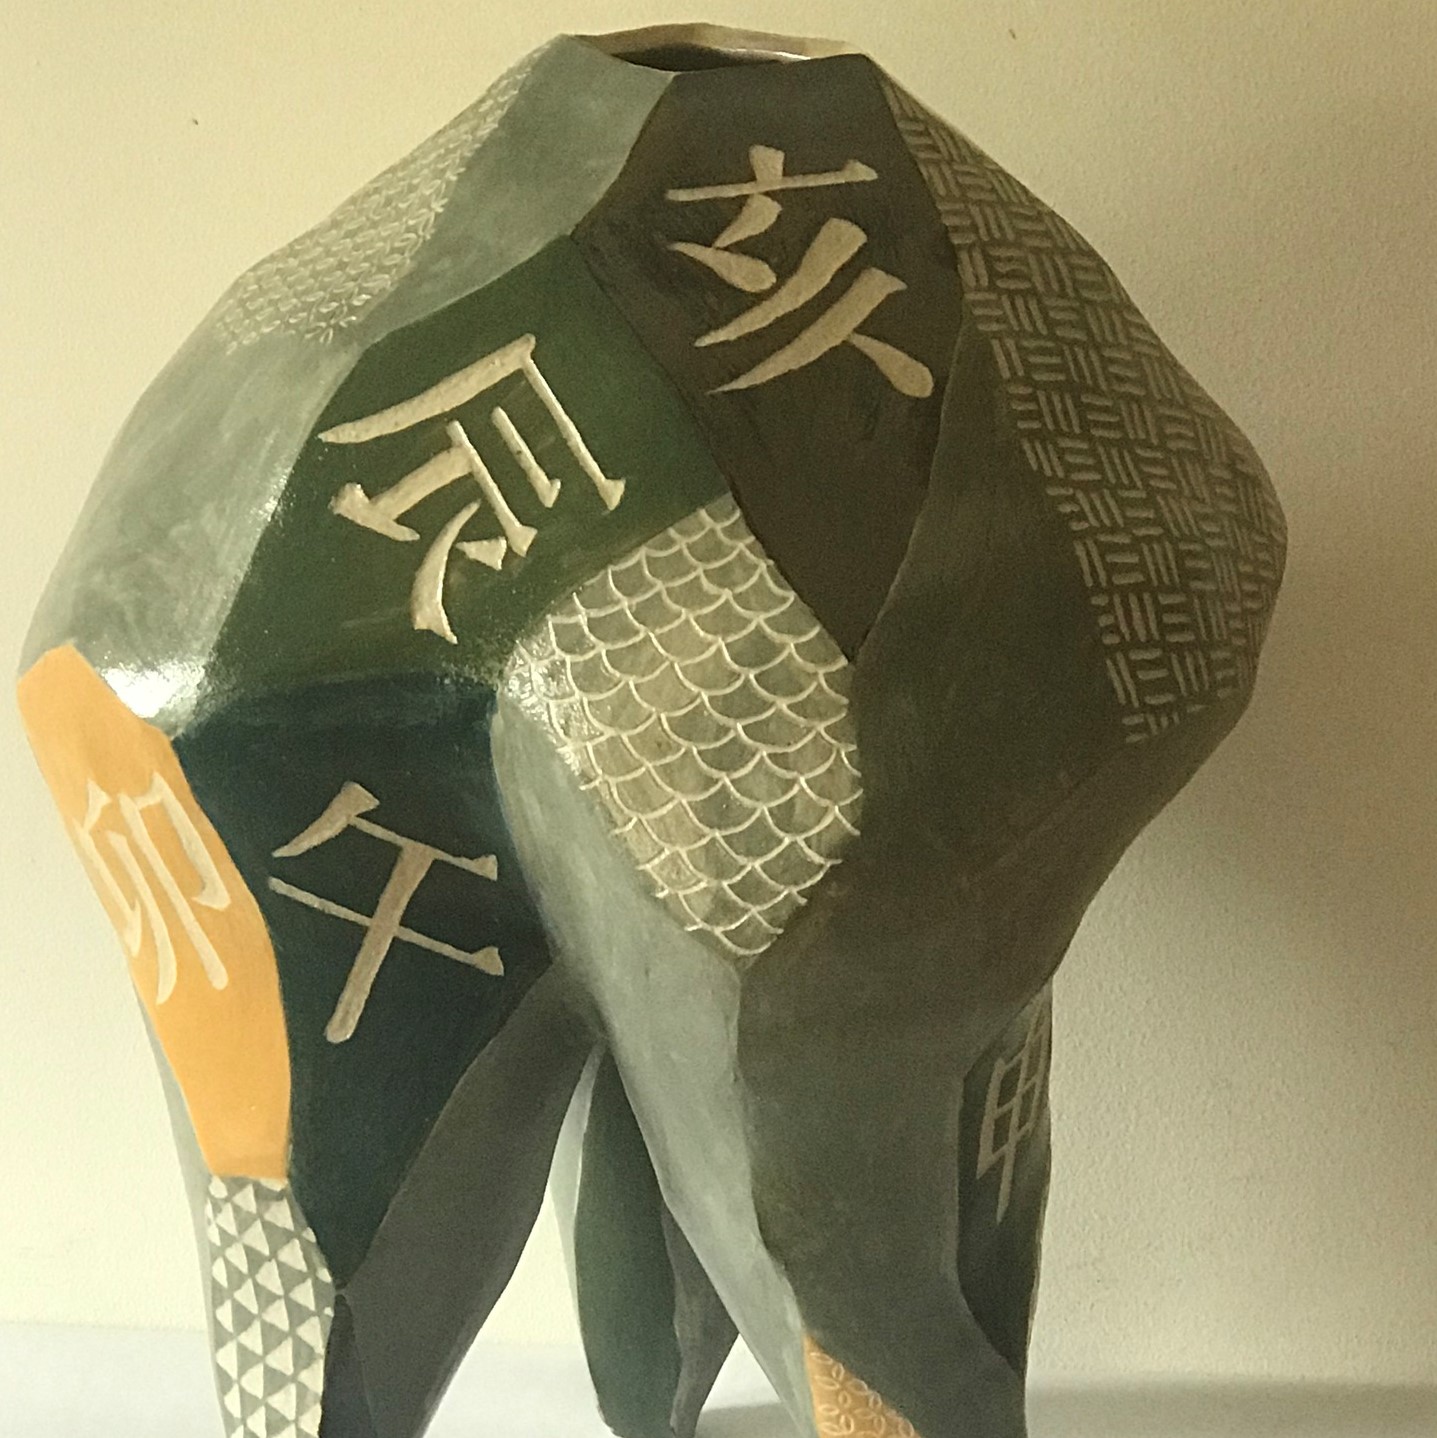 a ceramic piece that stands on four legs with scales, other patterns, and Chinese characters that state the different names Chinese zodiac signs.